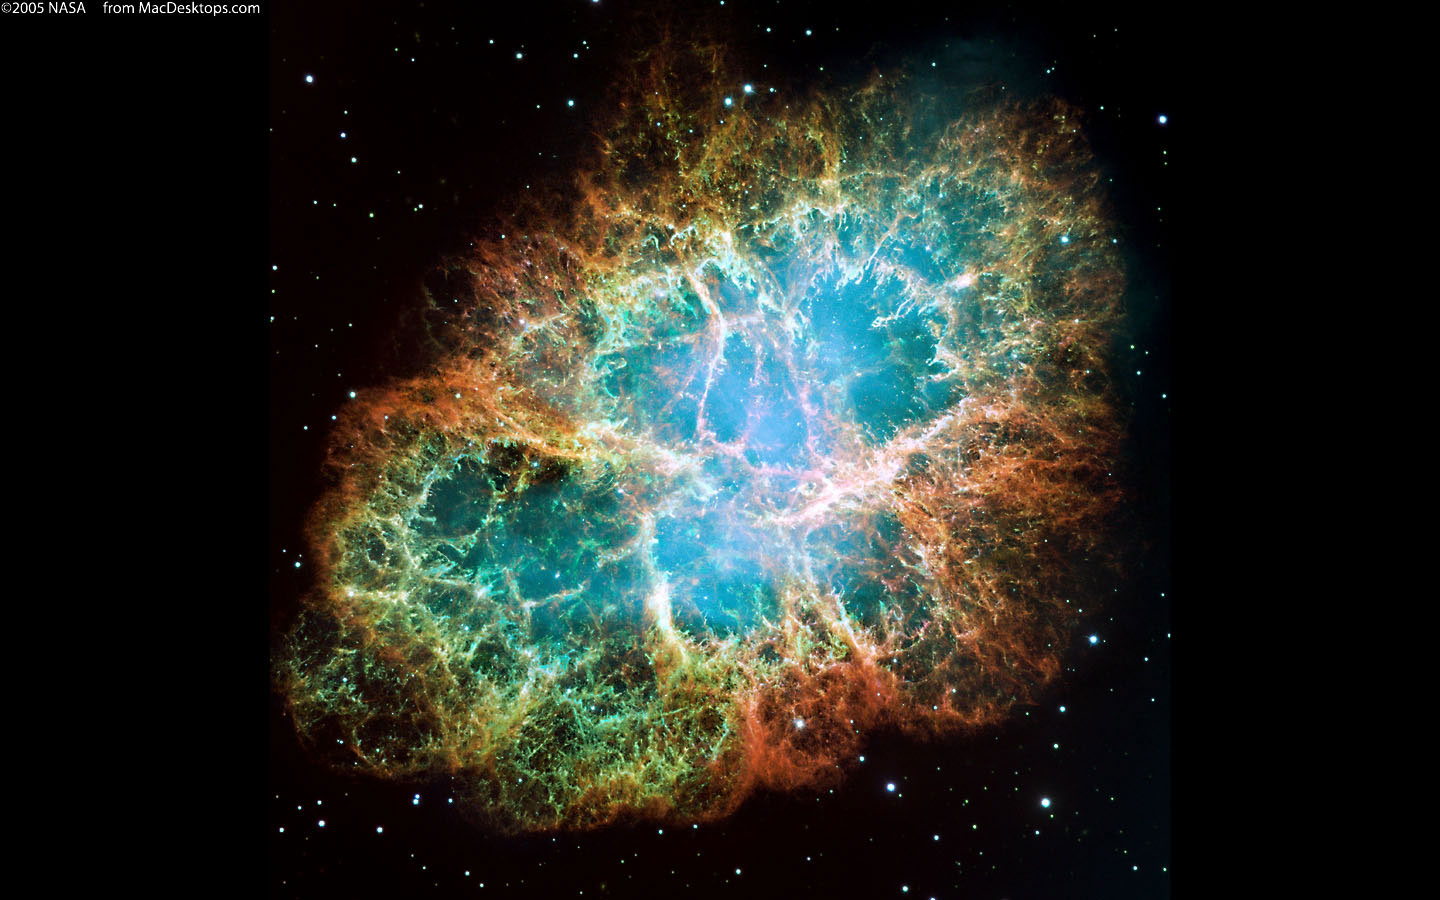 Crab Nebula Nasa 3388 Hd Wallpapers in Space   Imagescicom